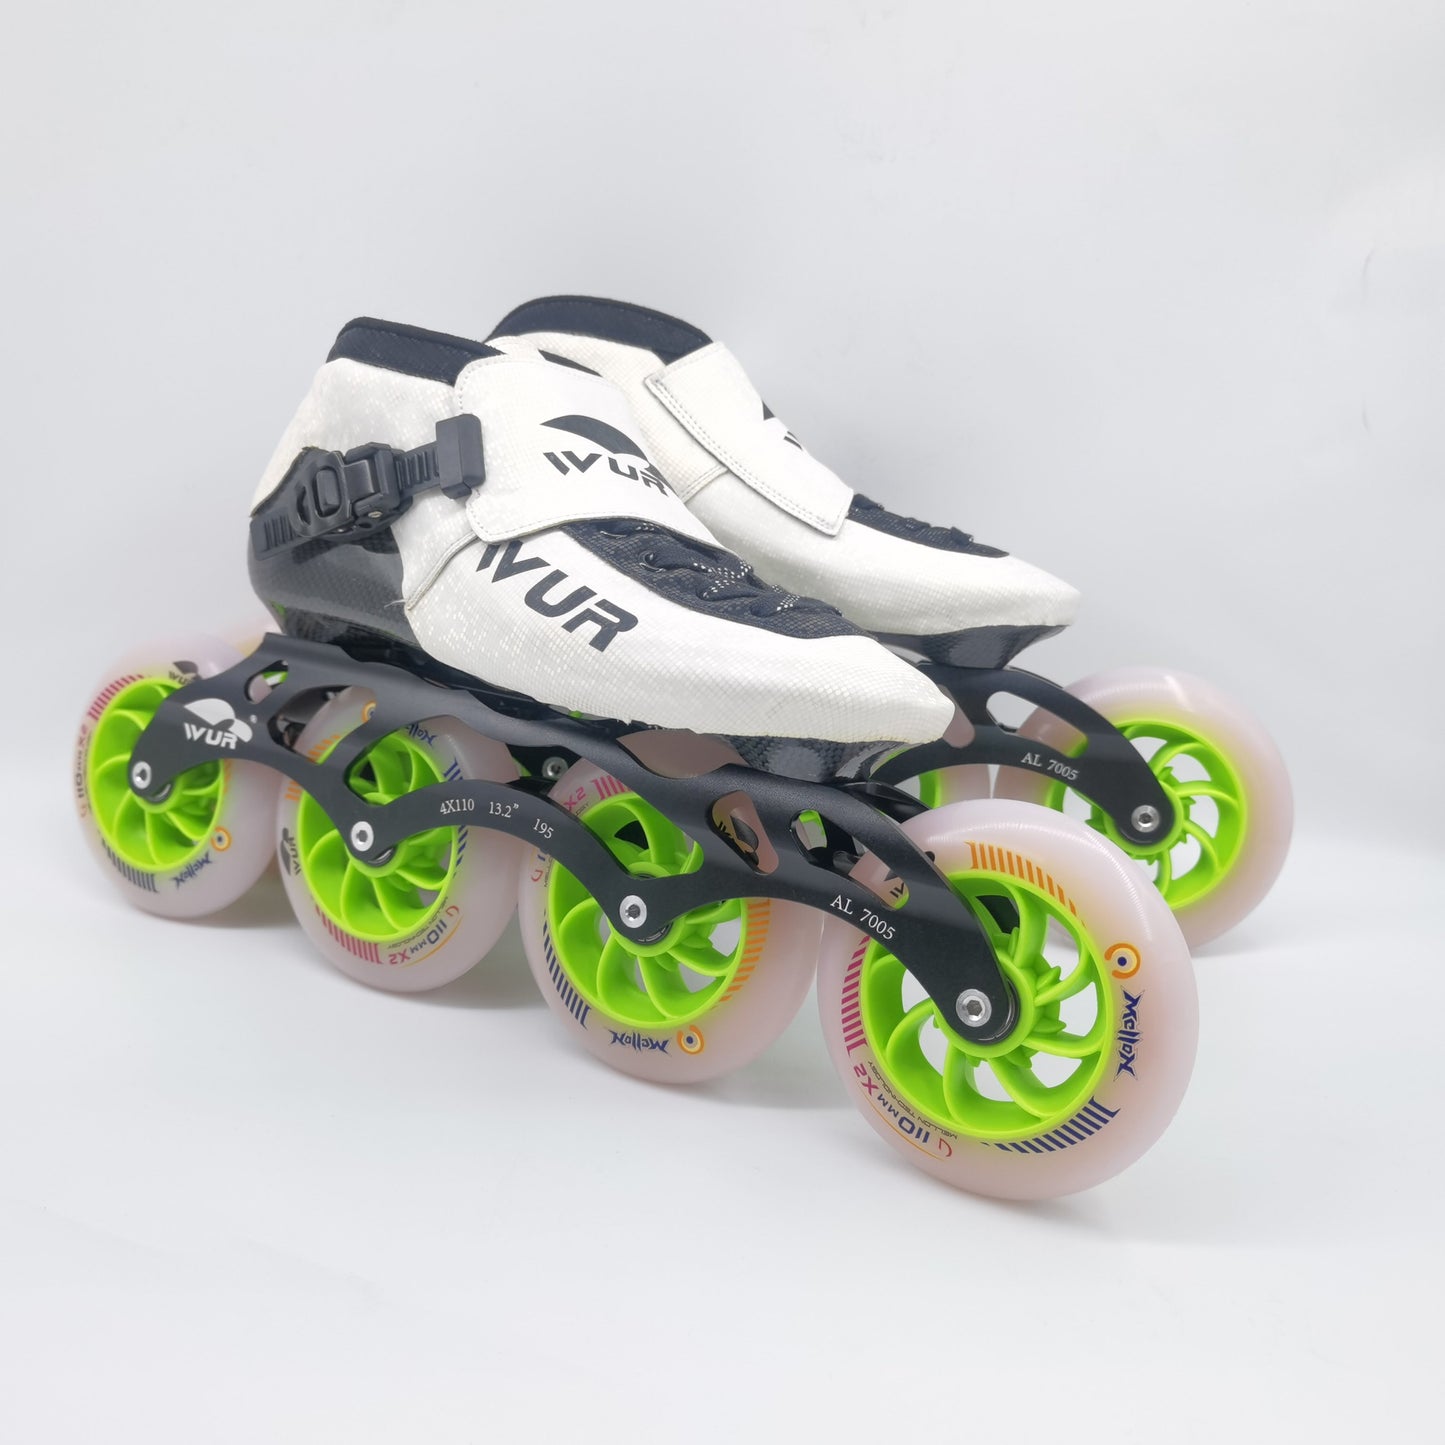 WUR Skates brand inline Speed Skates F1 black and white Color With Double Hardness Wheel